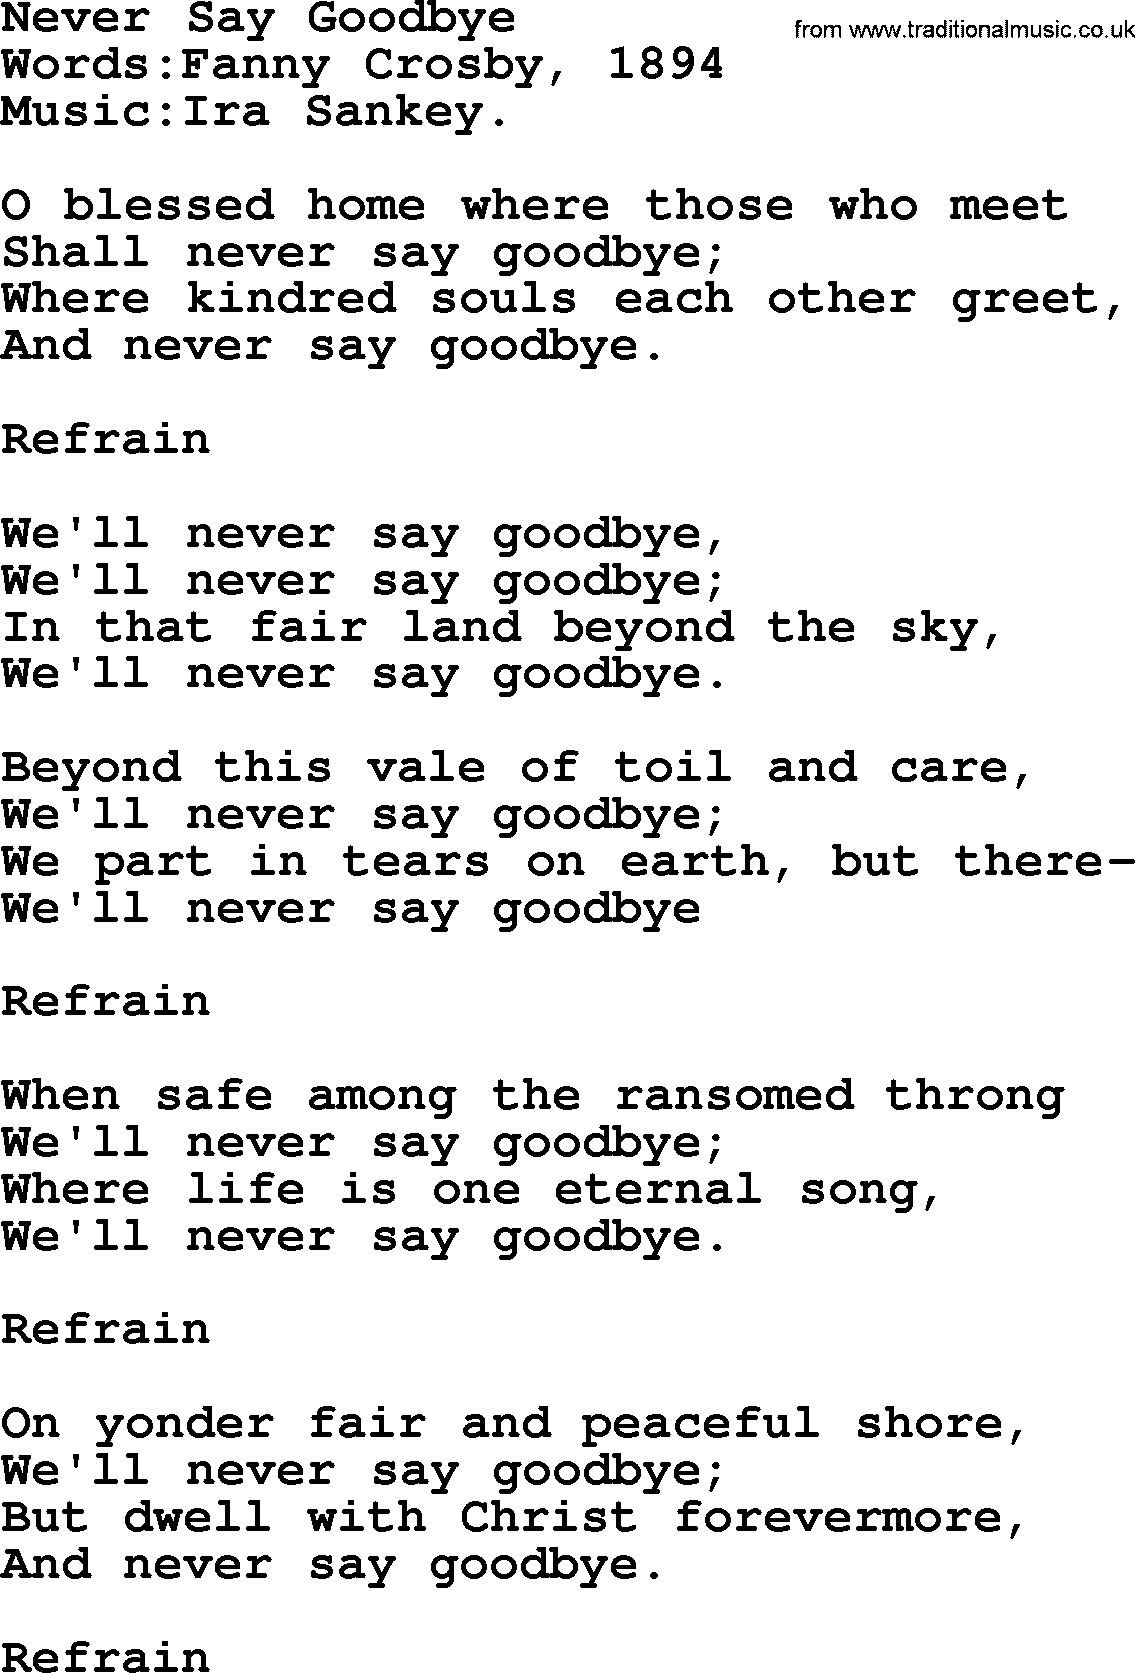 Songs and Hymns about Heaven: Never Say Goodbye lyrics with PDF